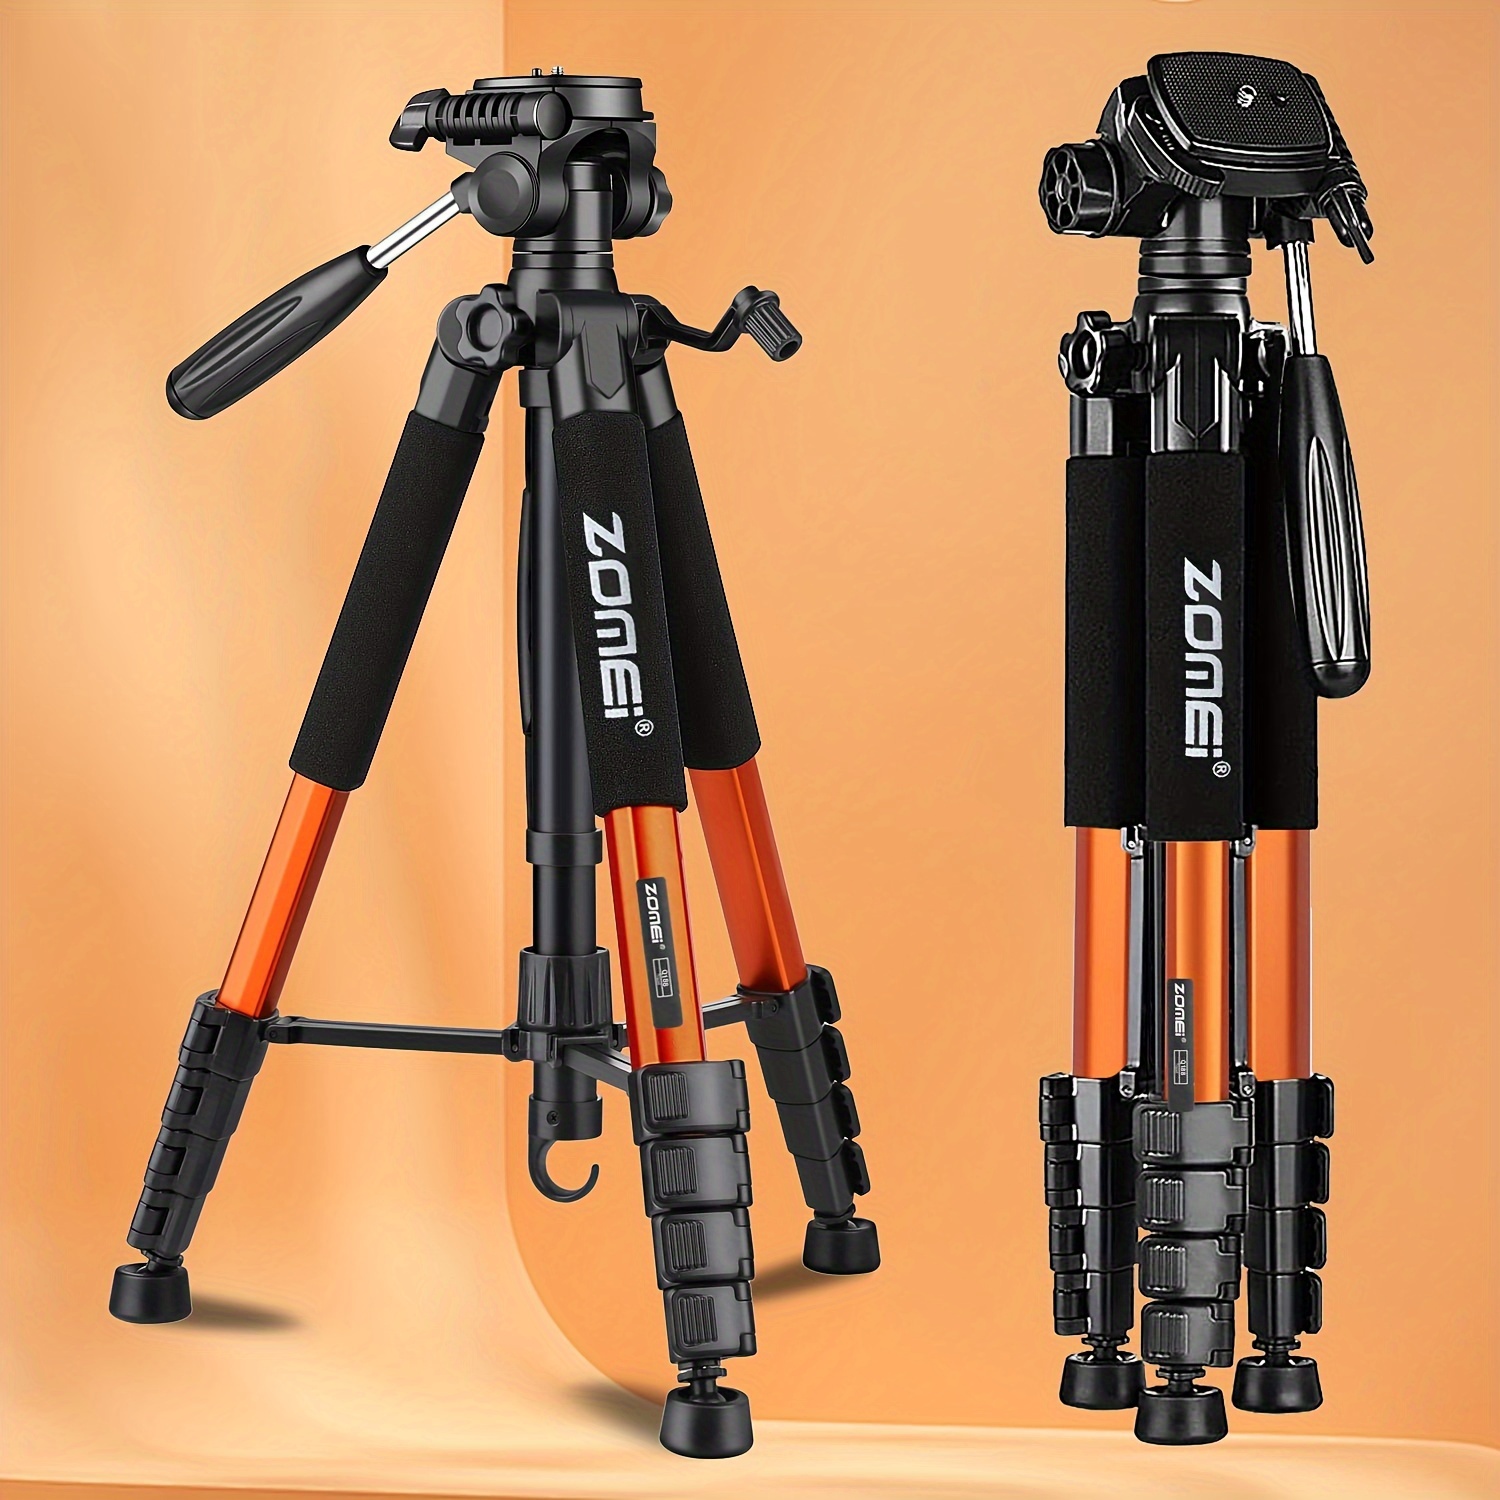 

Professional Heavy Duty Video Camcorder Aluminum Alloy Tripod With Fluid Drag Head For Dslr/ Slr Camera, Adjustable Height: 19.6-74inch (orange), For Dslr & Phones